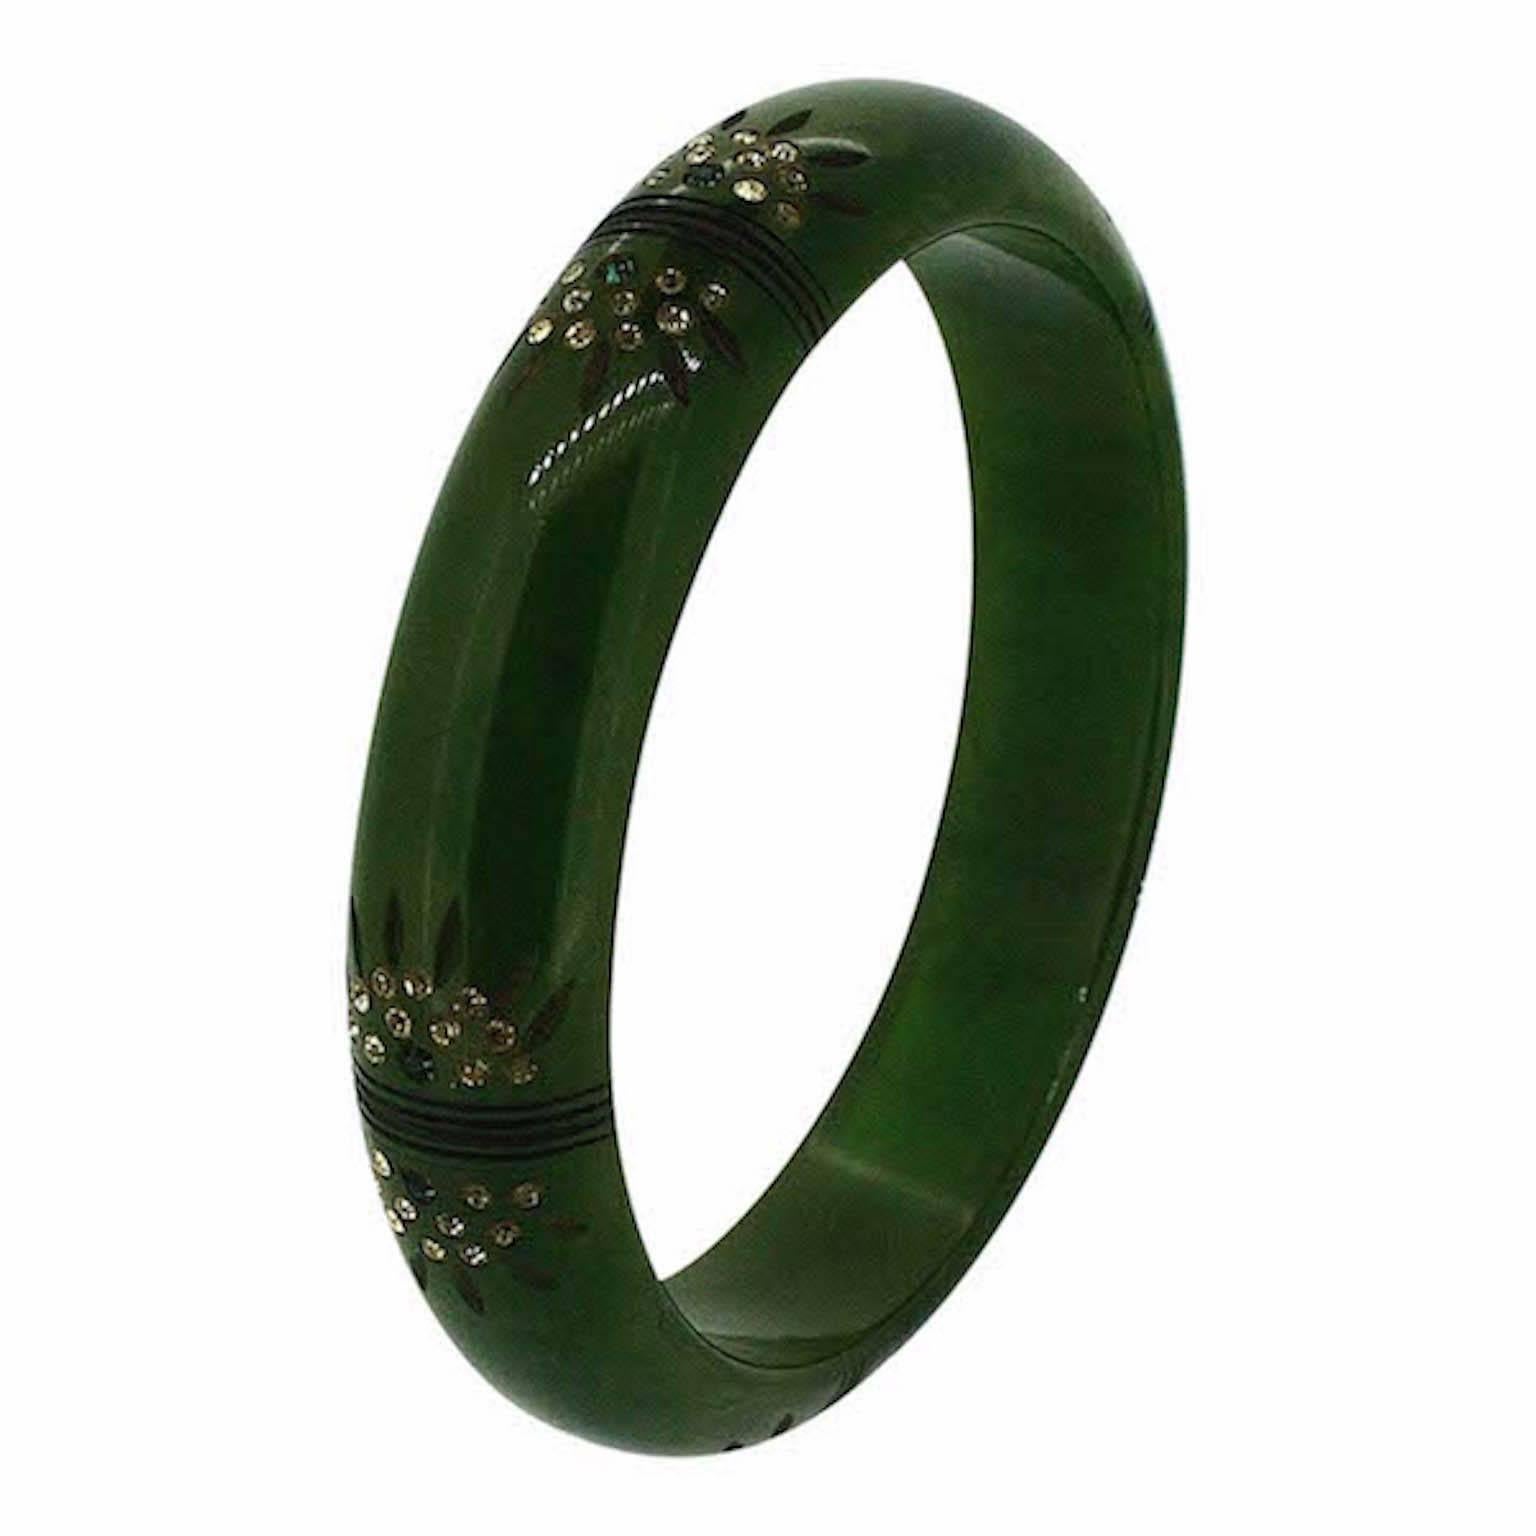 1940s Green Carved Bakelite and Rhinestone Vintage Bangle In Excellent Condition For Sale In Wigan, GB